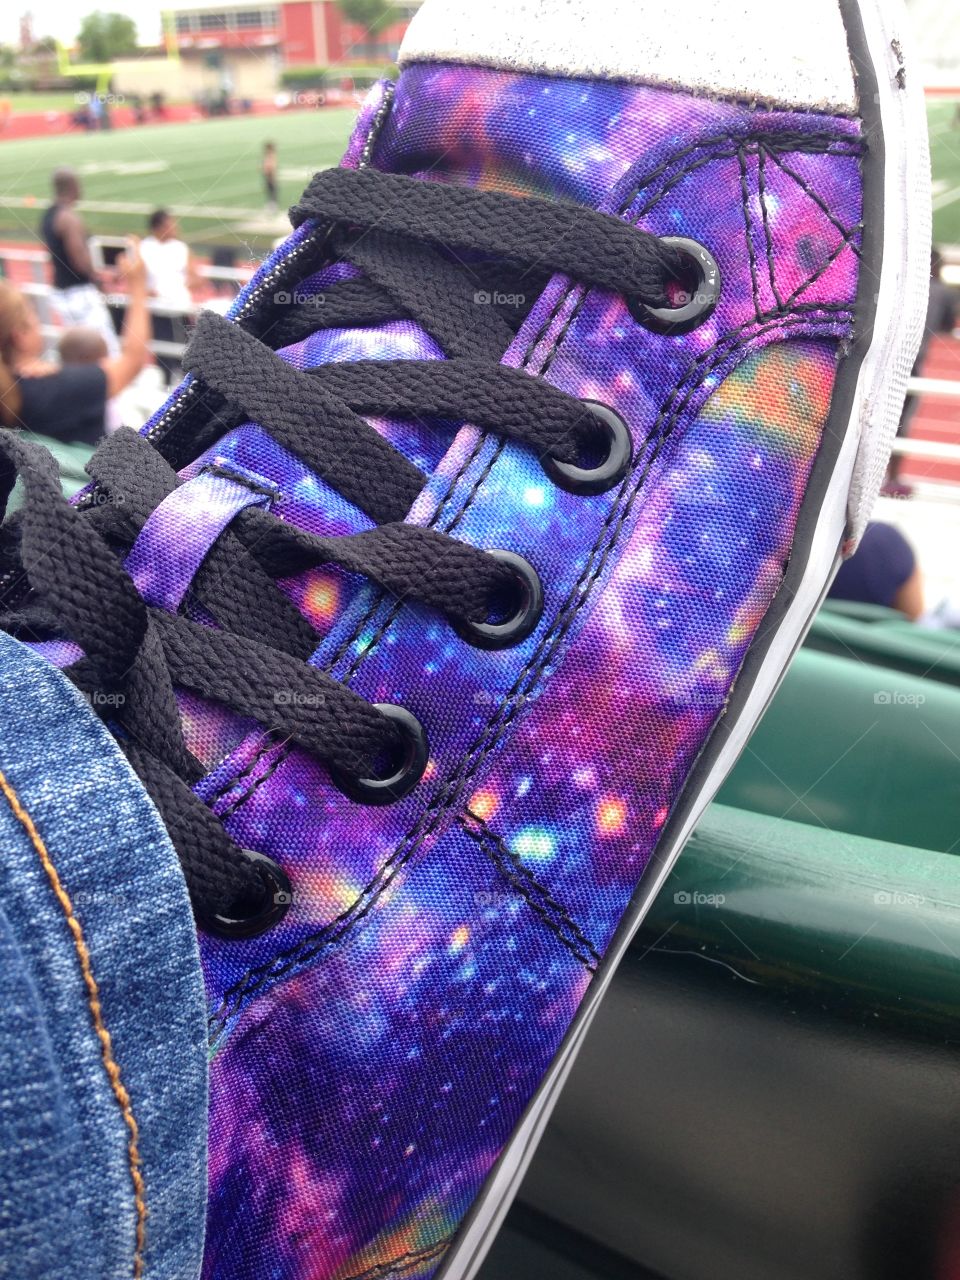 Football is out of this world. Close up of Girls Galaxy tennis shoe at football game